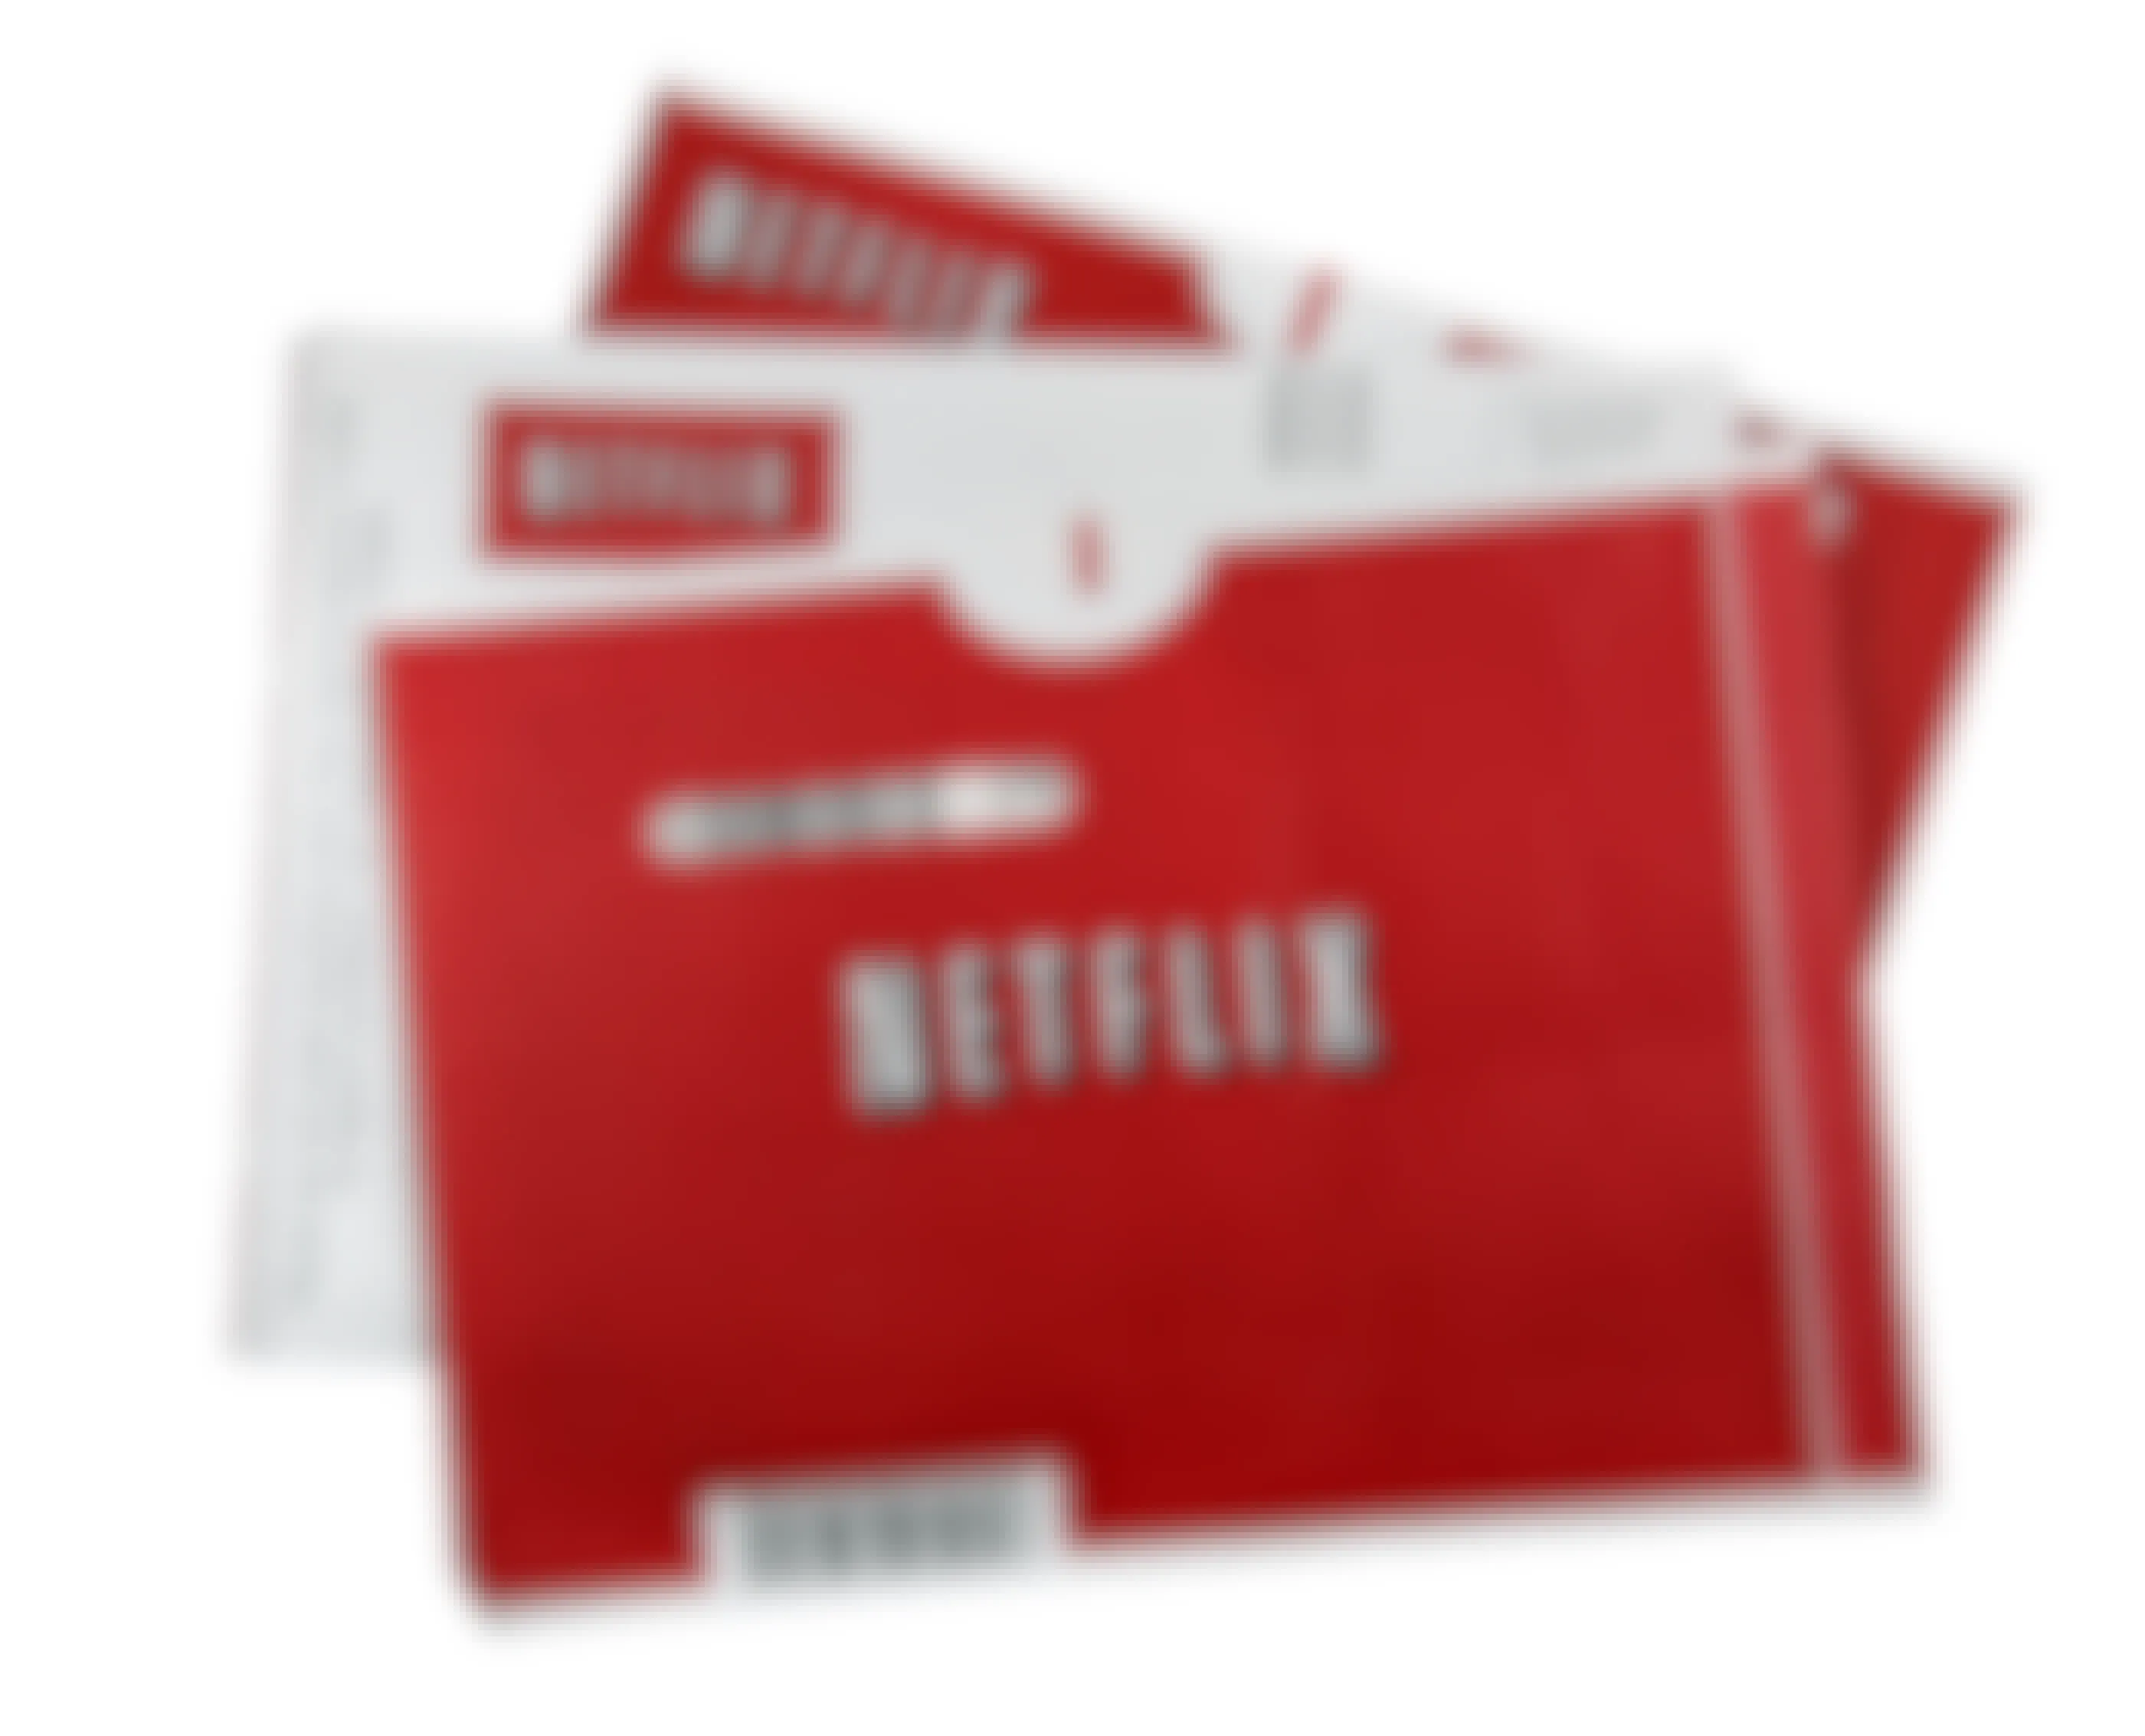 Netflix Ended Their DVD Service With a Big Giveaway — Here's What People Will Get